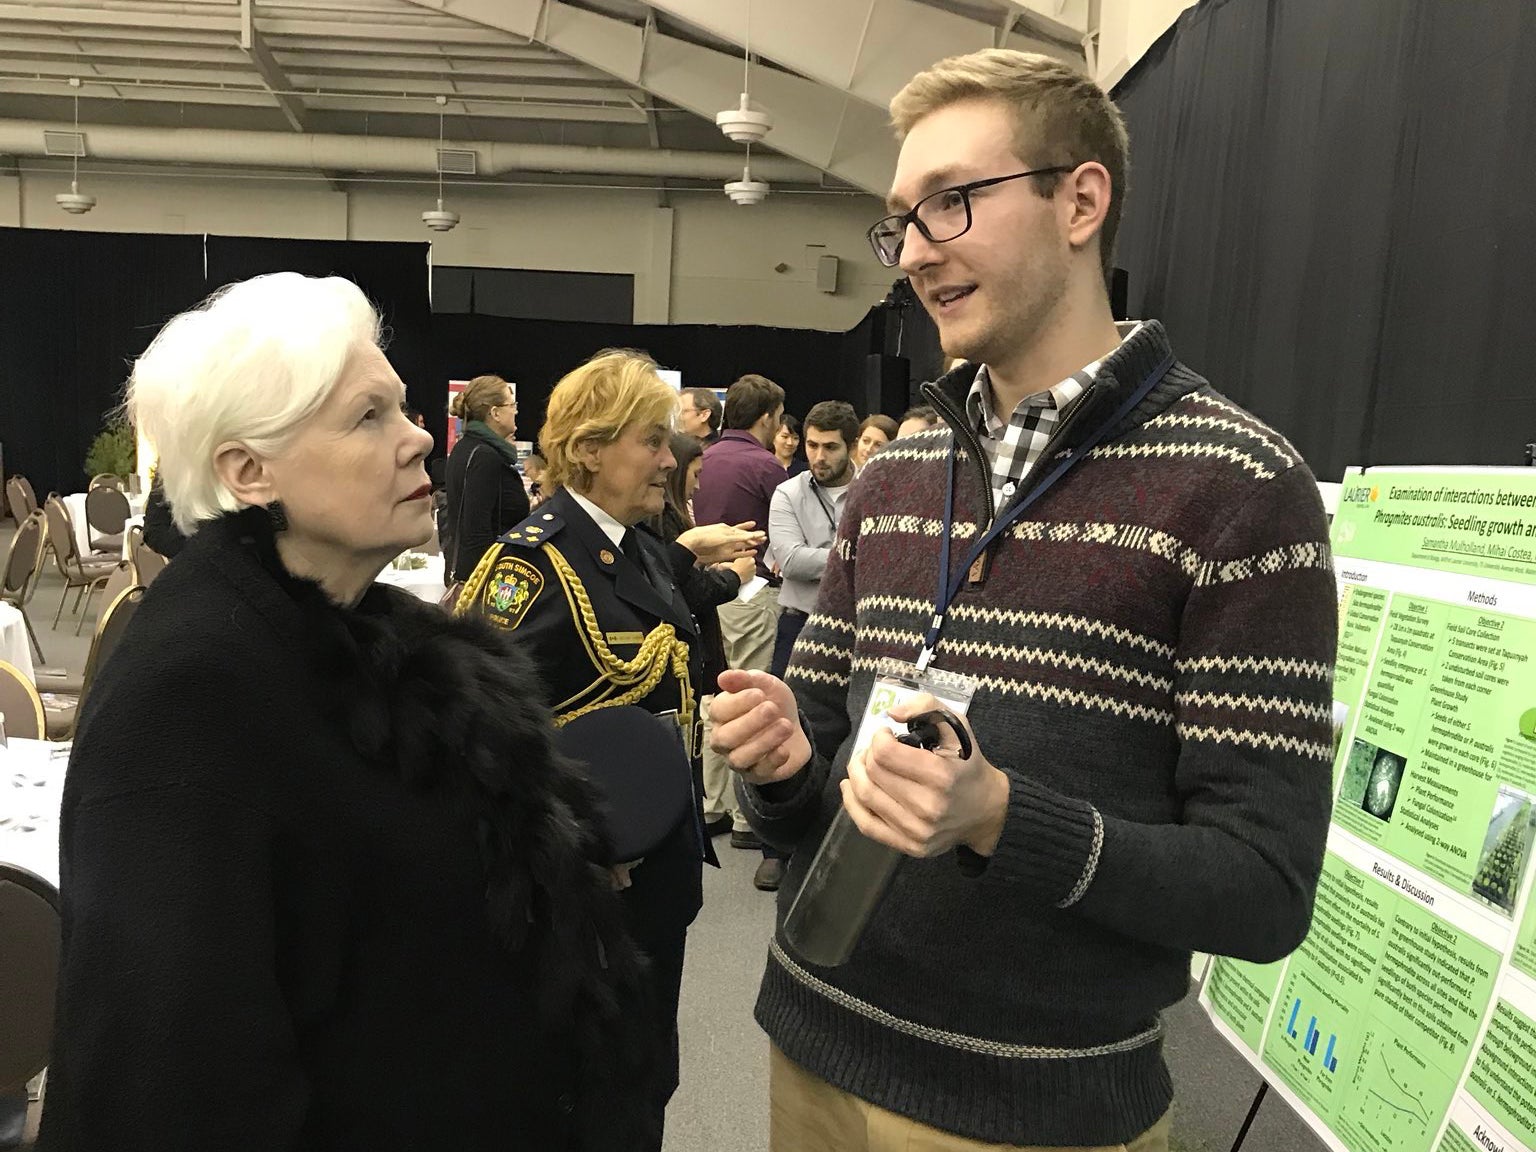 Andrew McDonald talking to a lady with silver hair at an event in front of his research poster.